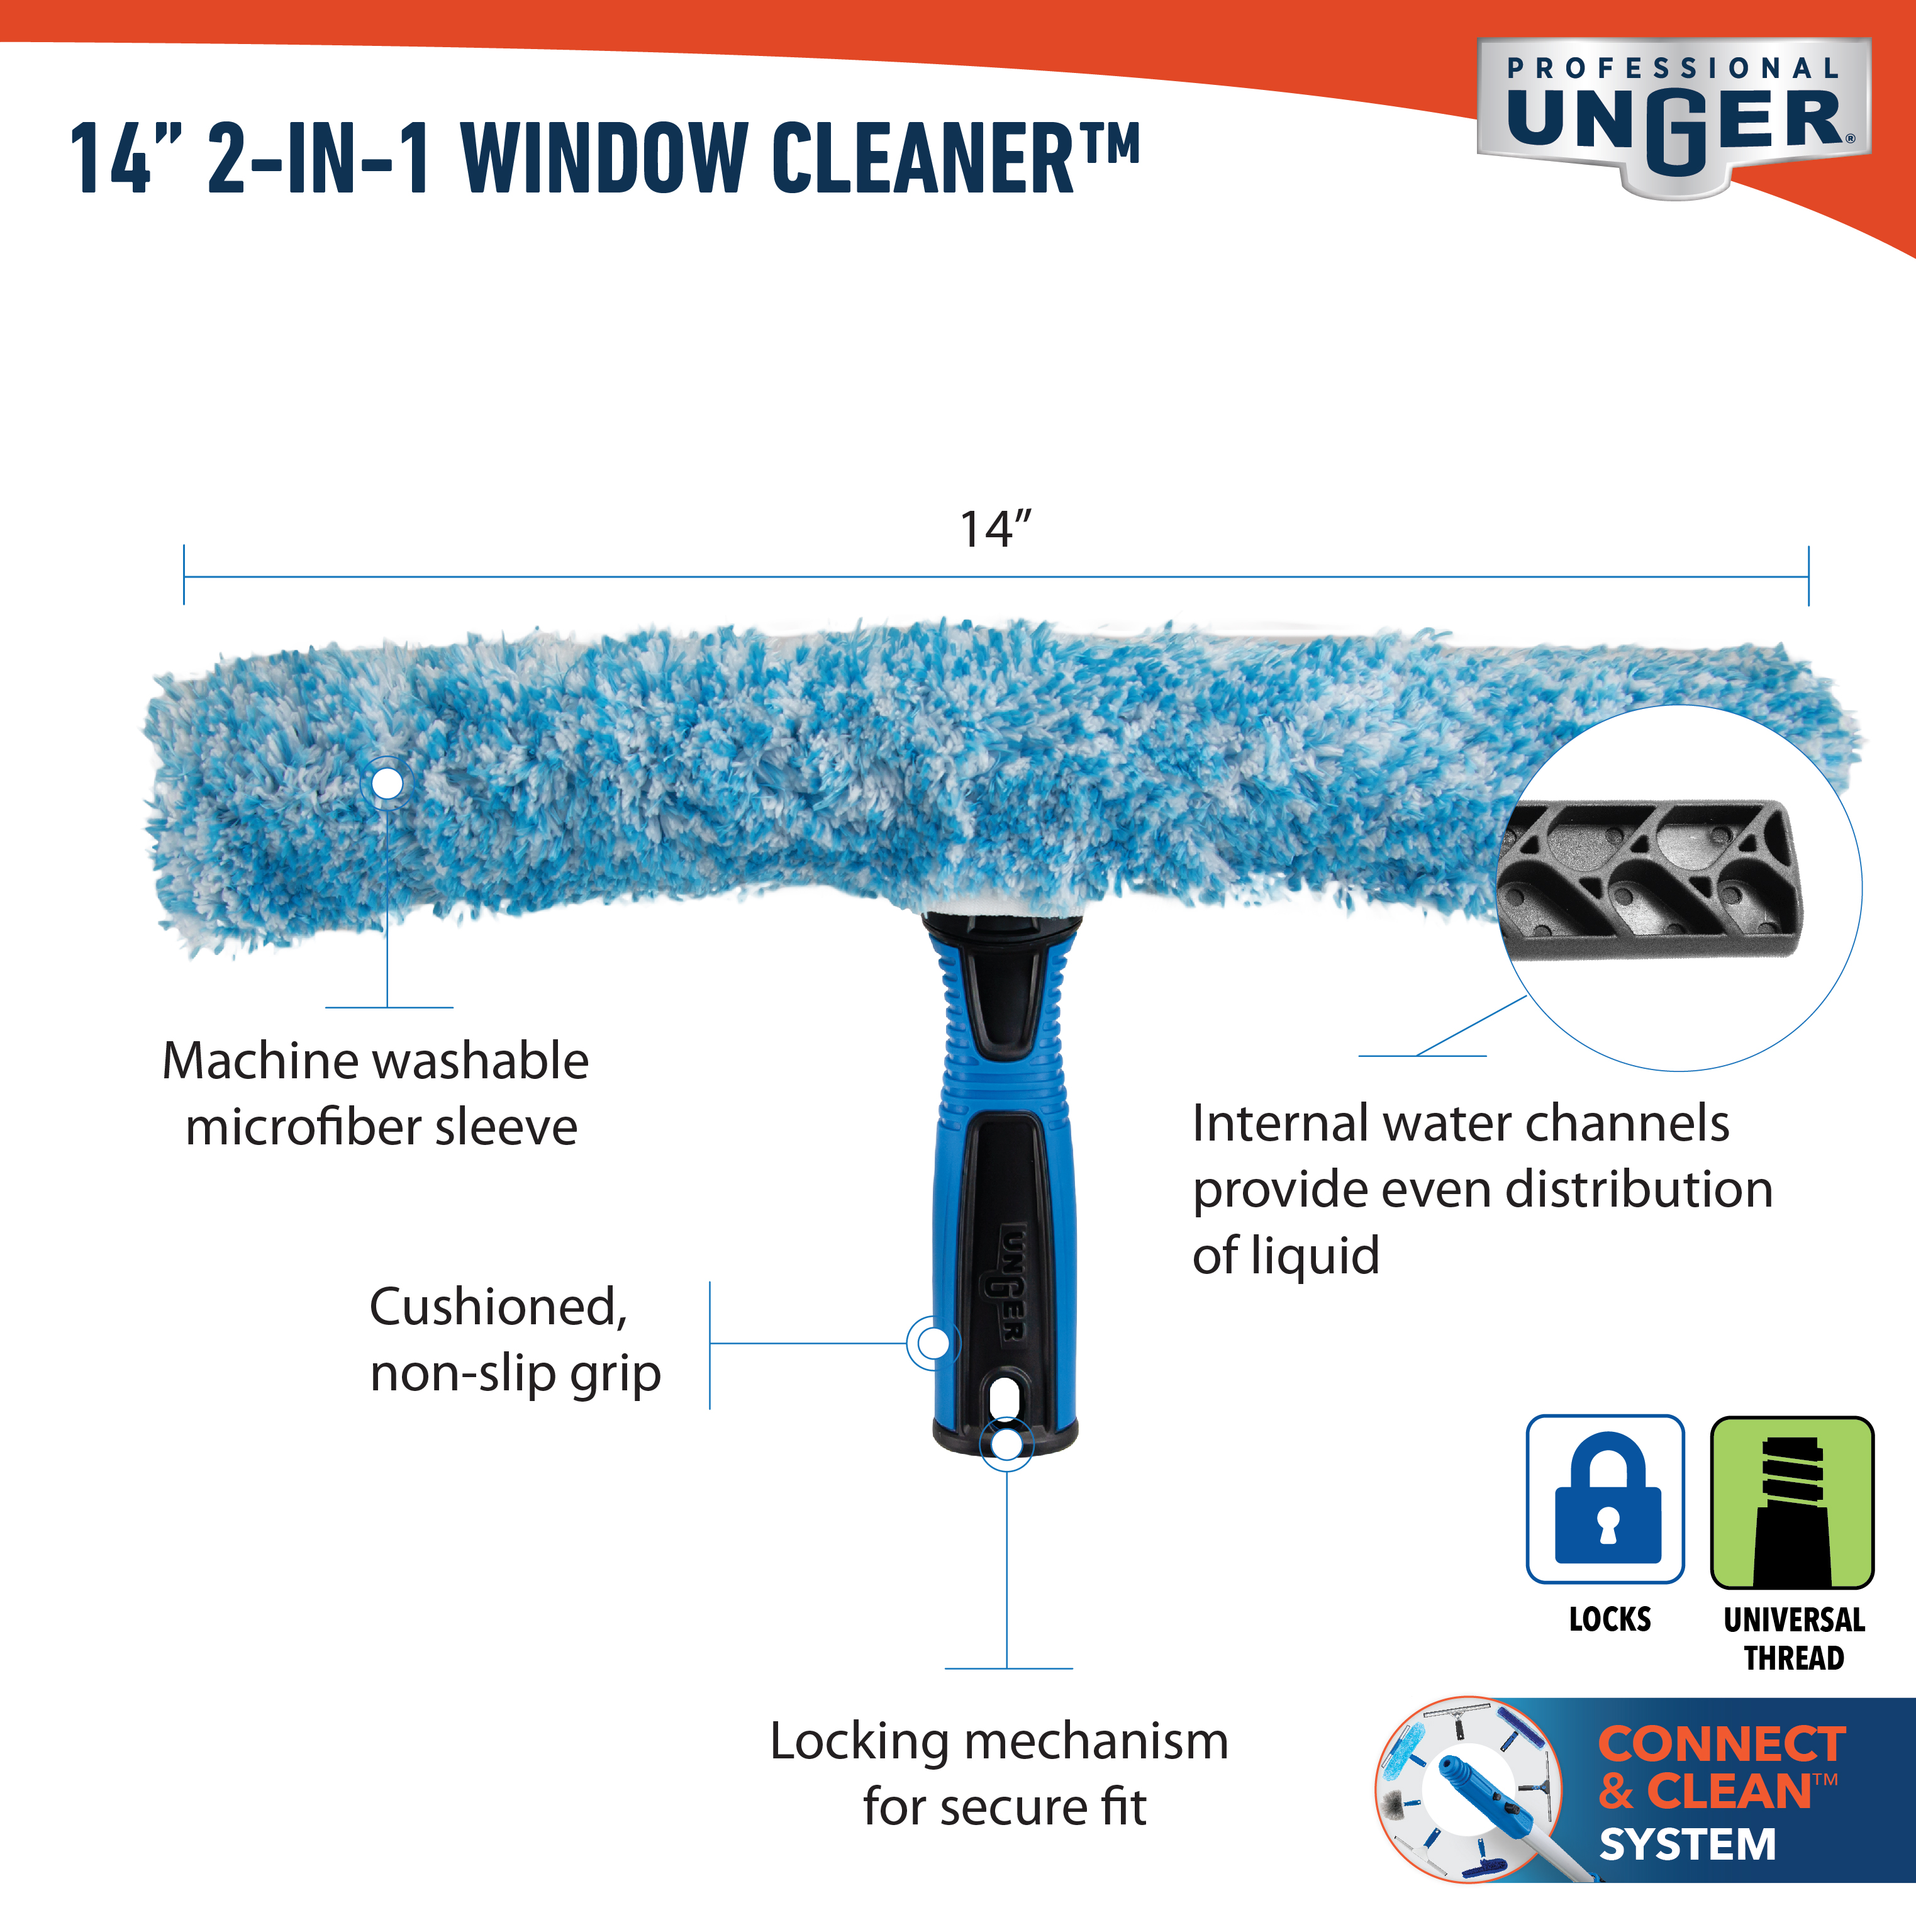 981640_UI_Unger Pro_14 inch 2-in-1 Window Cleaner_Infographics 1